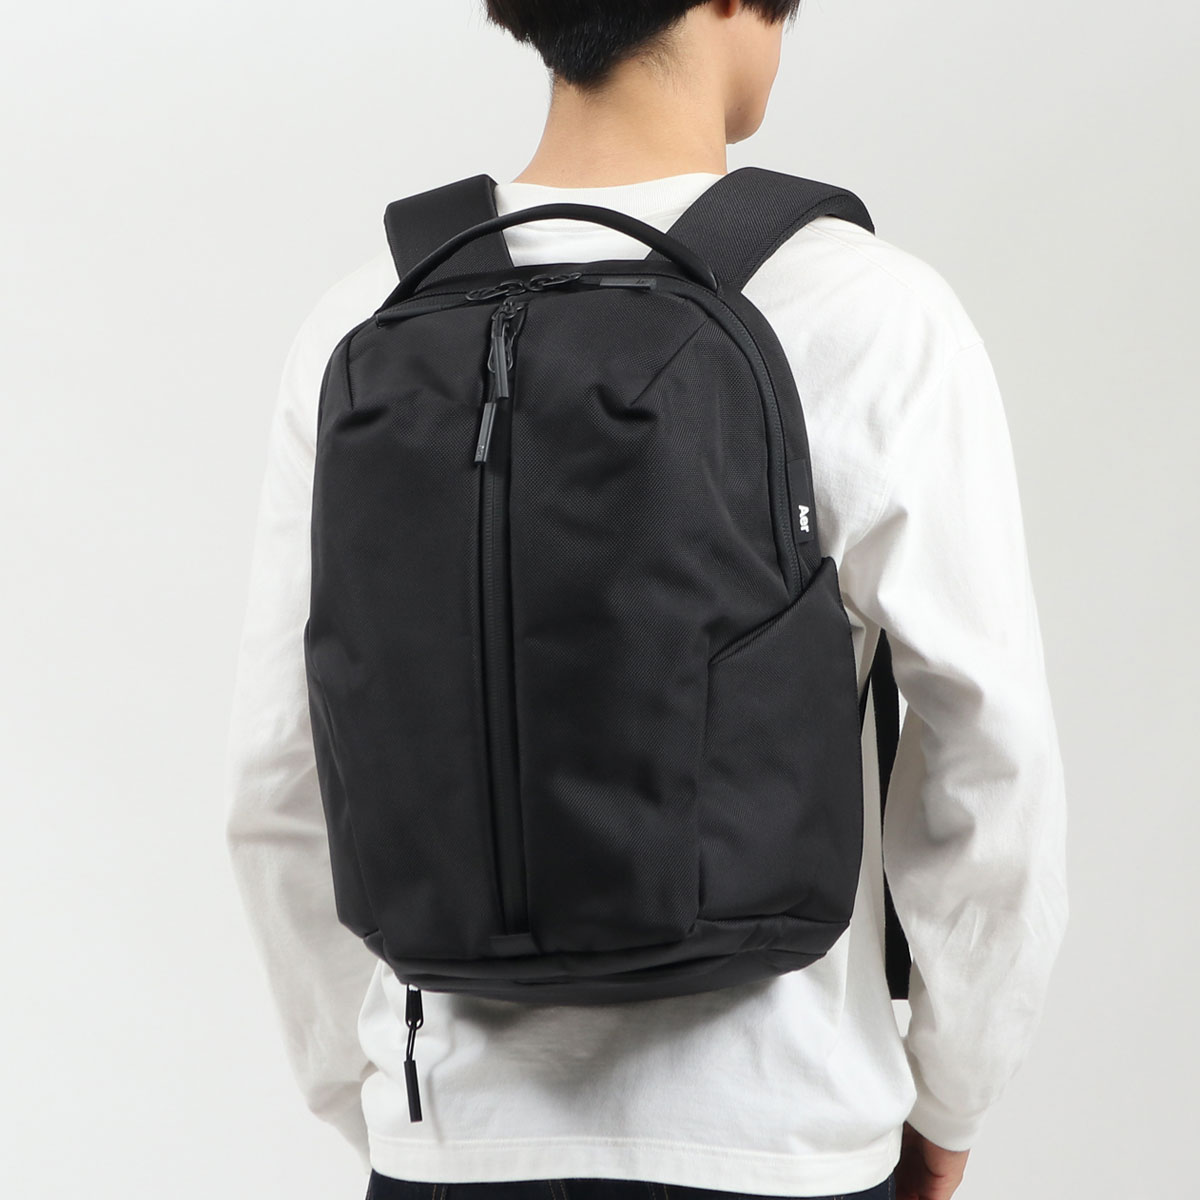 Aer エアー Active Collection Fit Pack 3 バックパック 18.7L